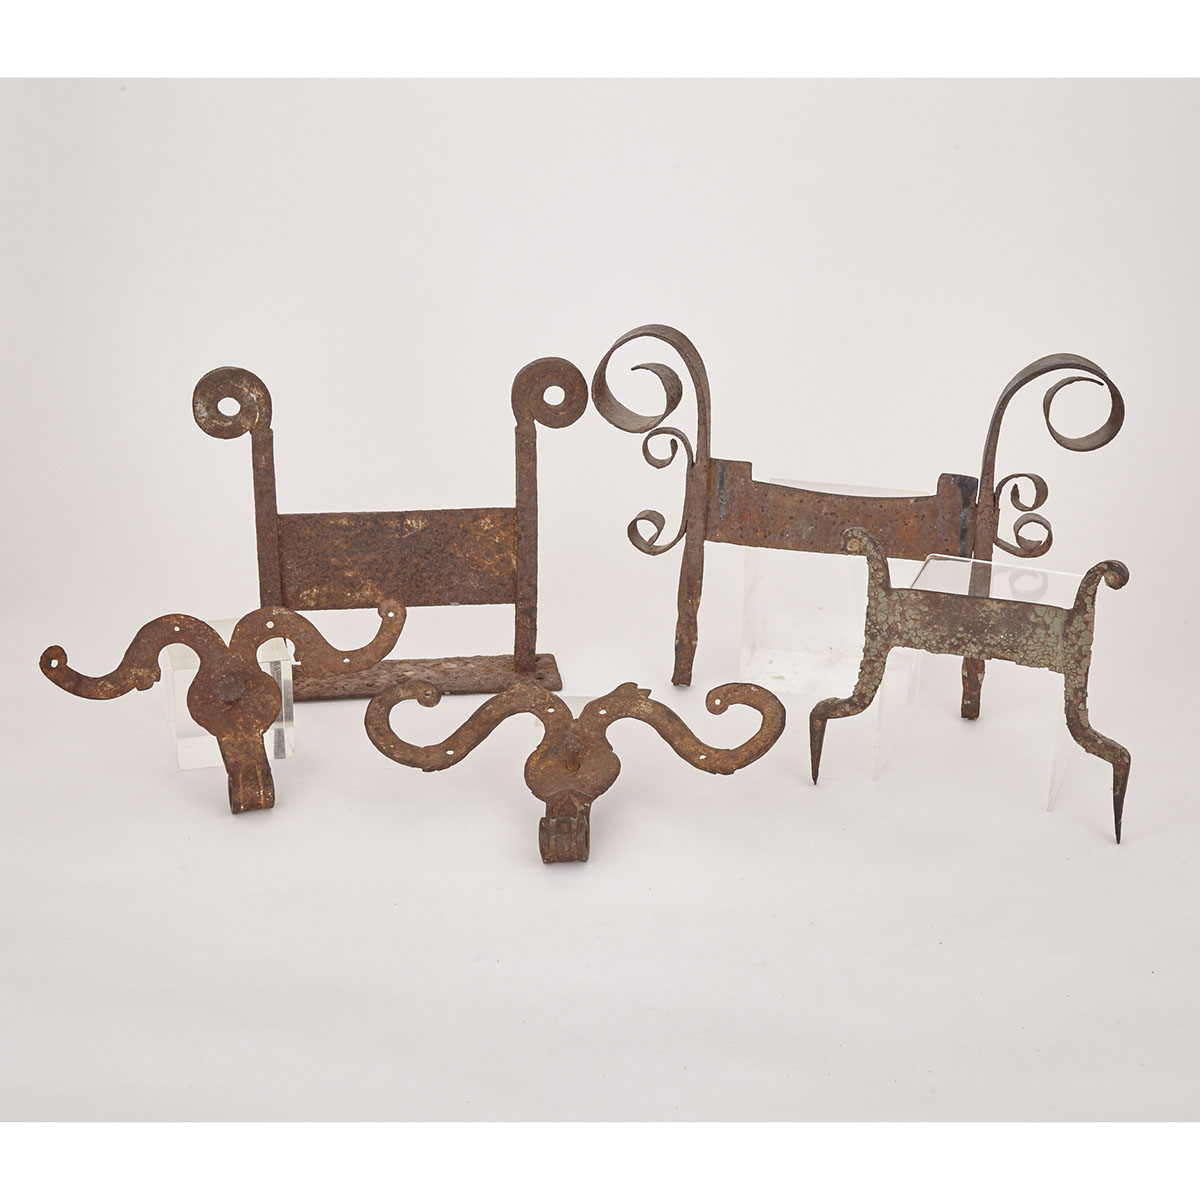 FIve Pieces Victorian Wrought Iron, 19th century